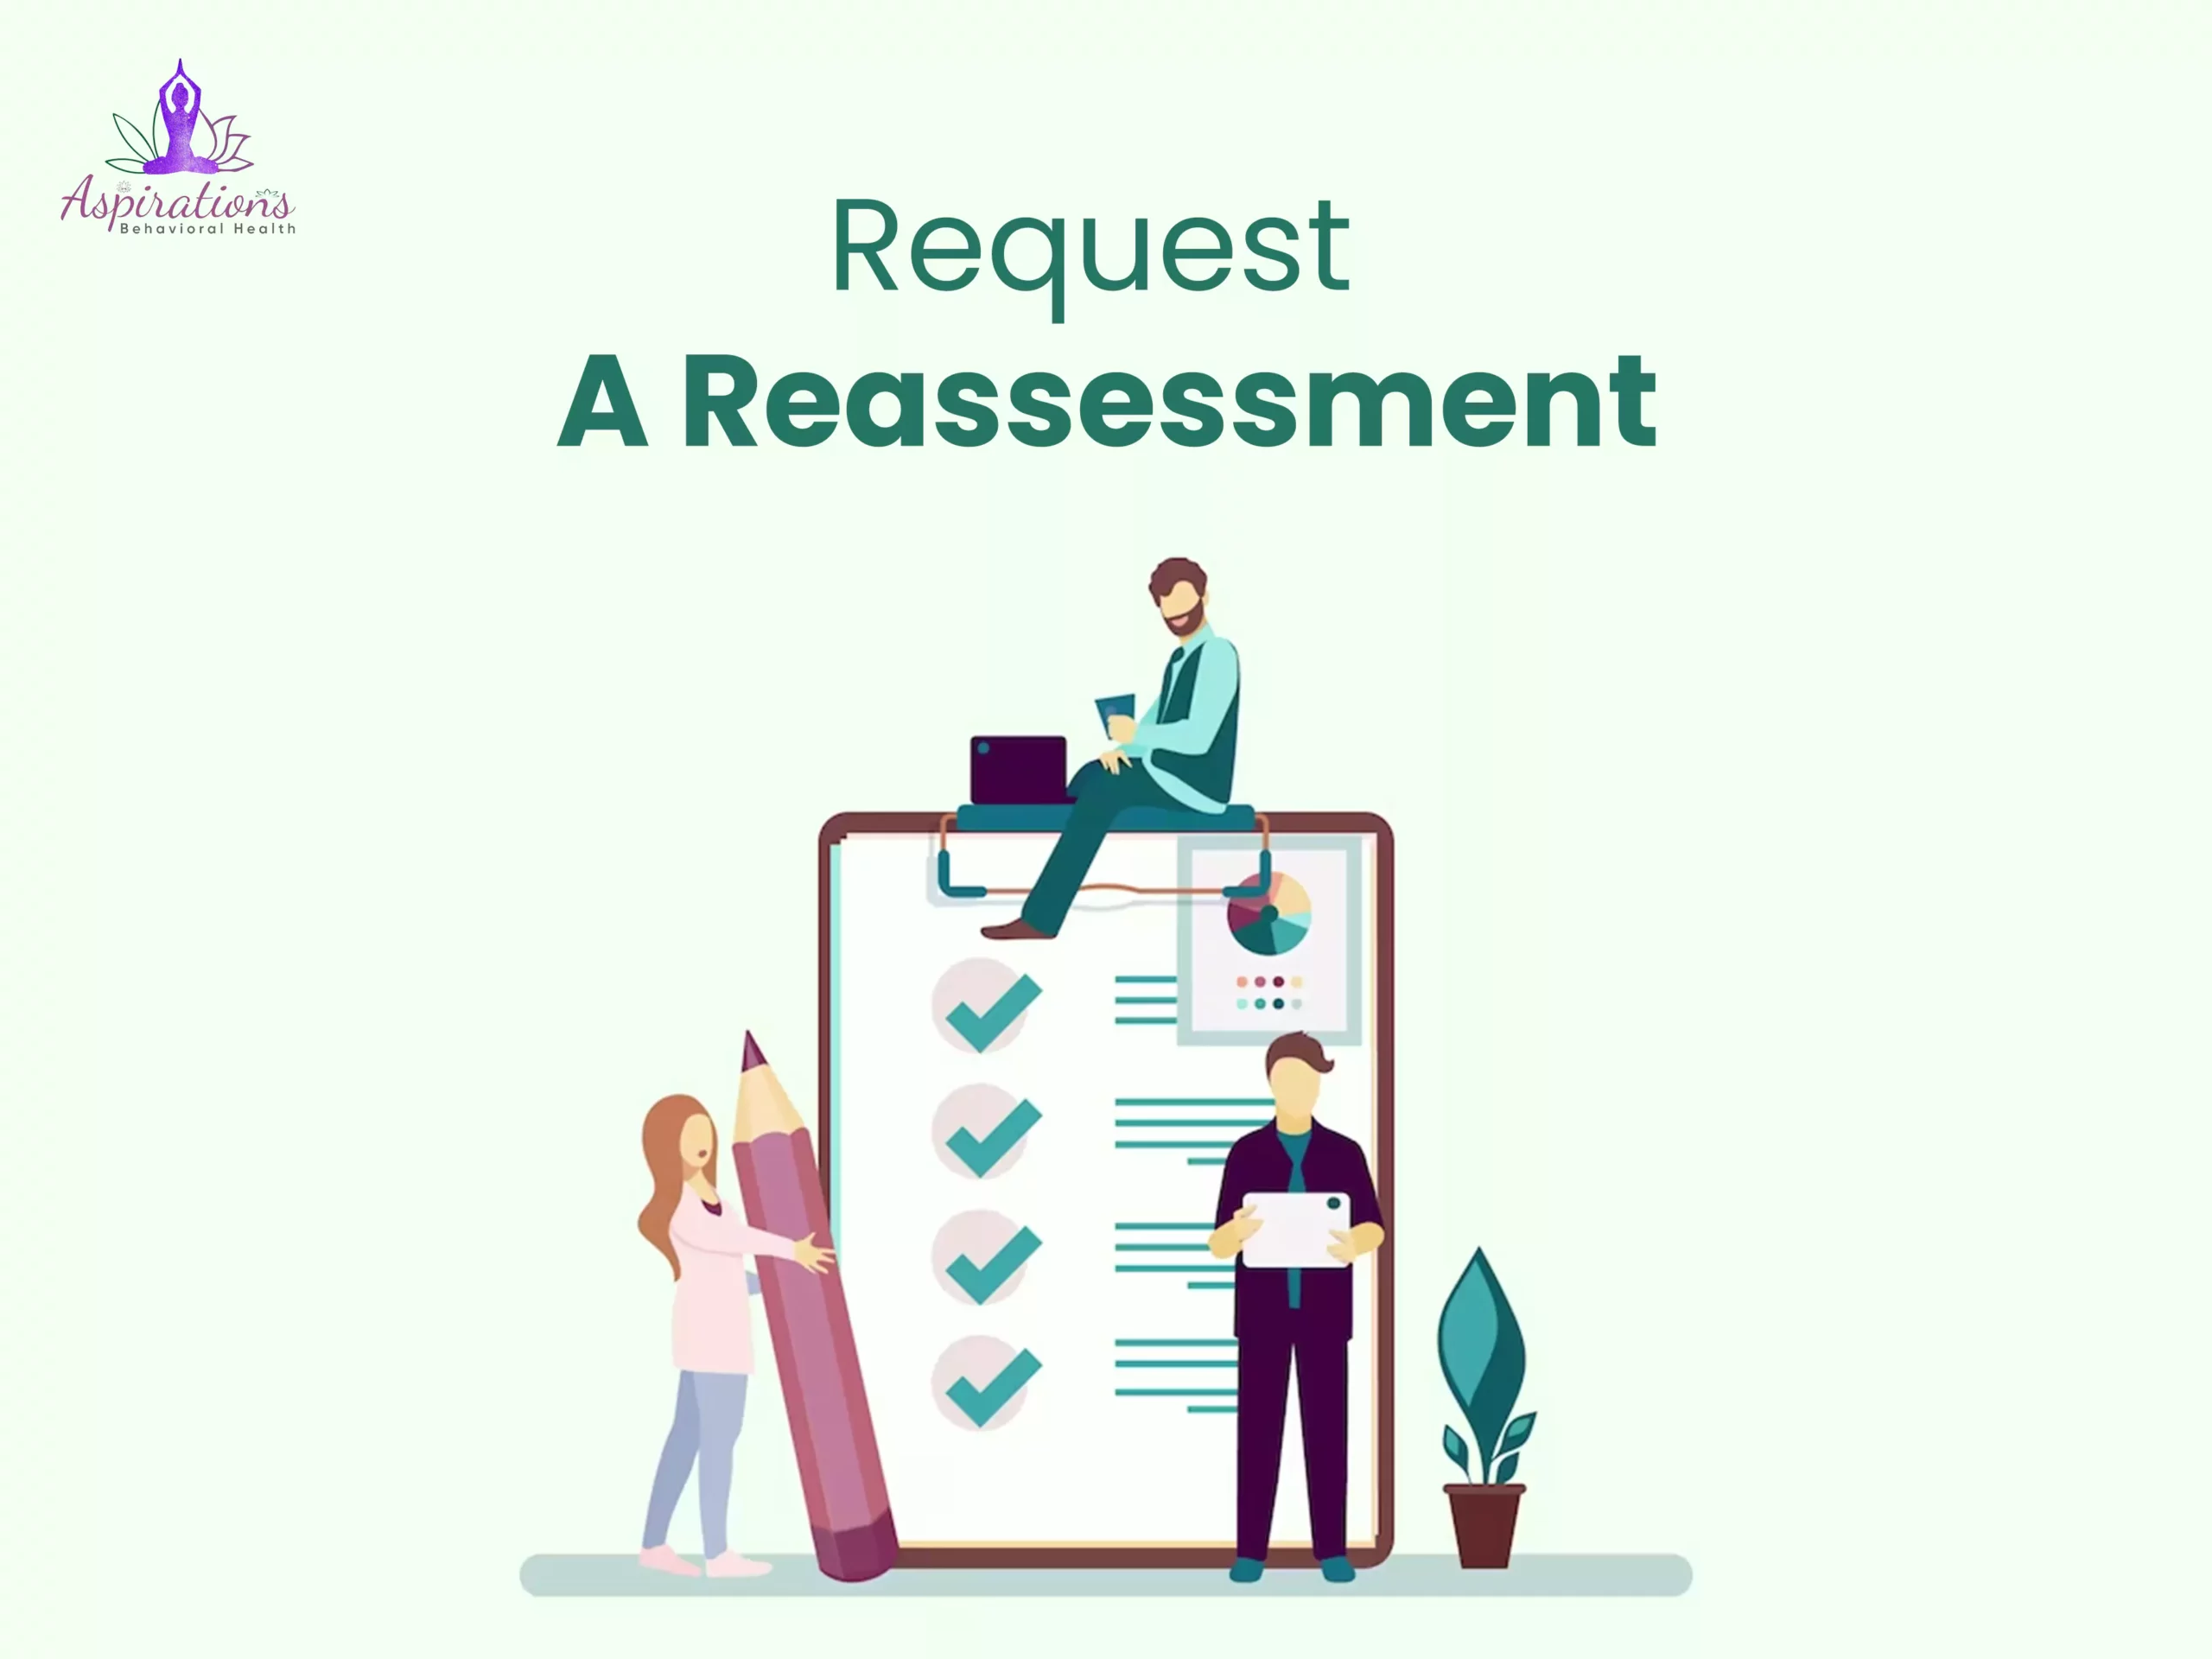 Request a Reassessment